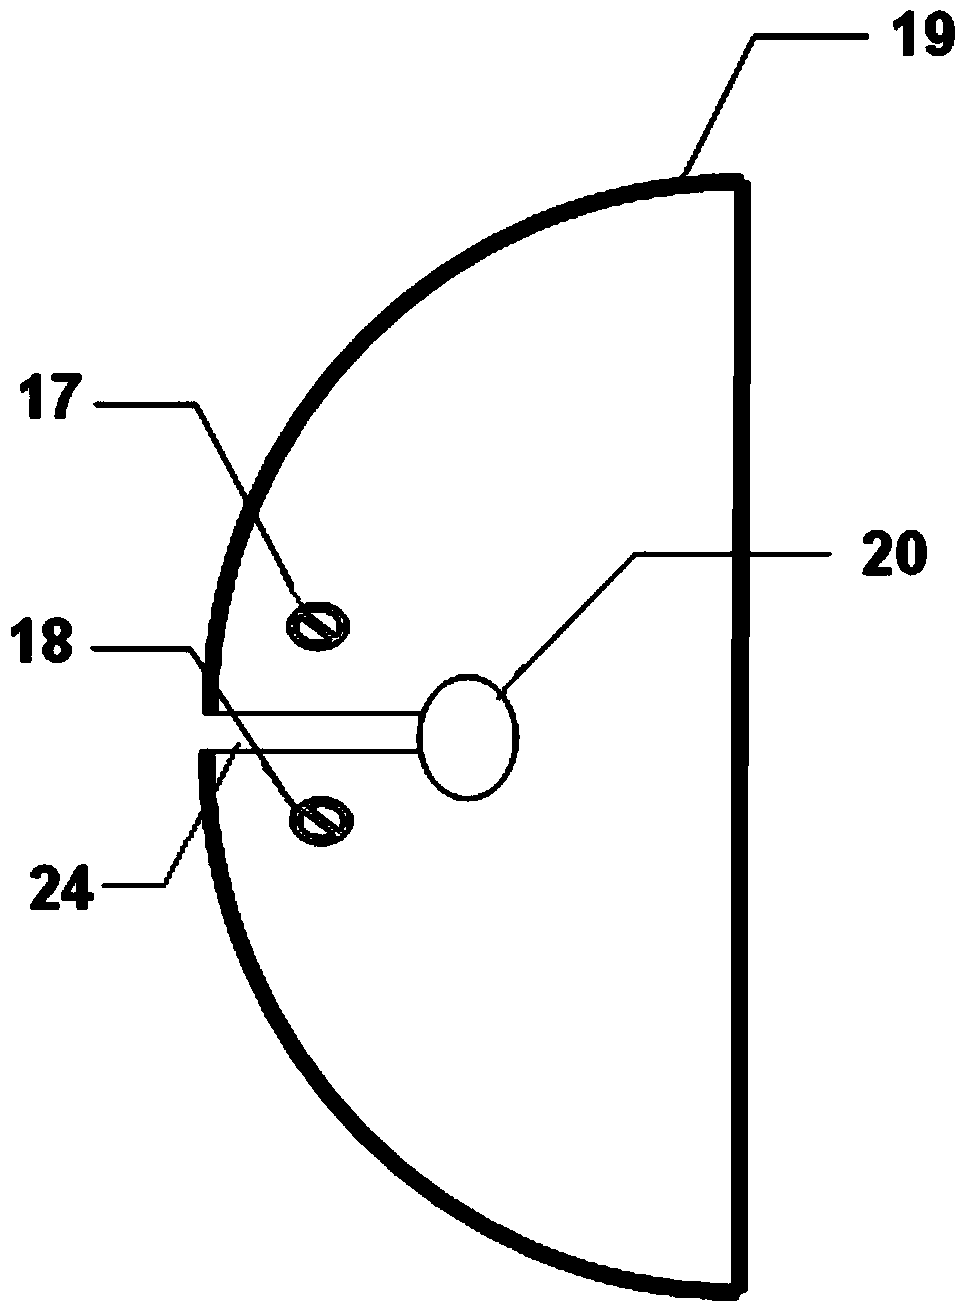 Adjustable dual-twisting mirror box for measuring apparent parameter of yarn and device thereof